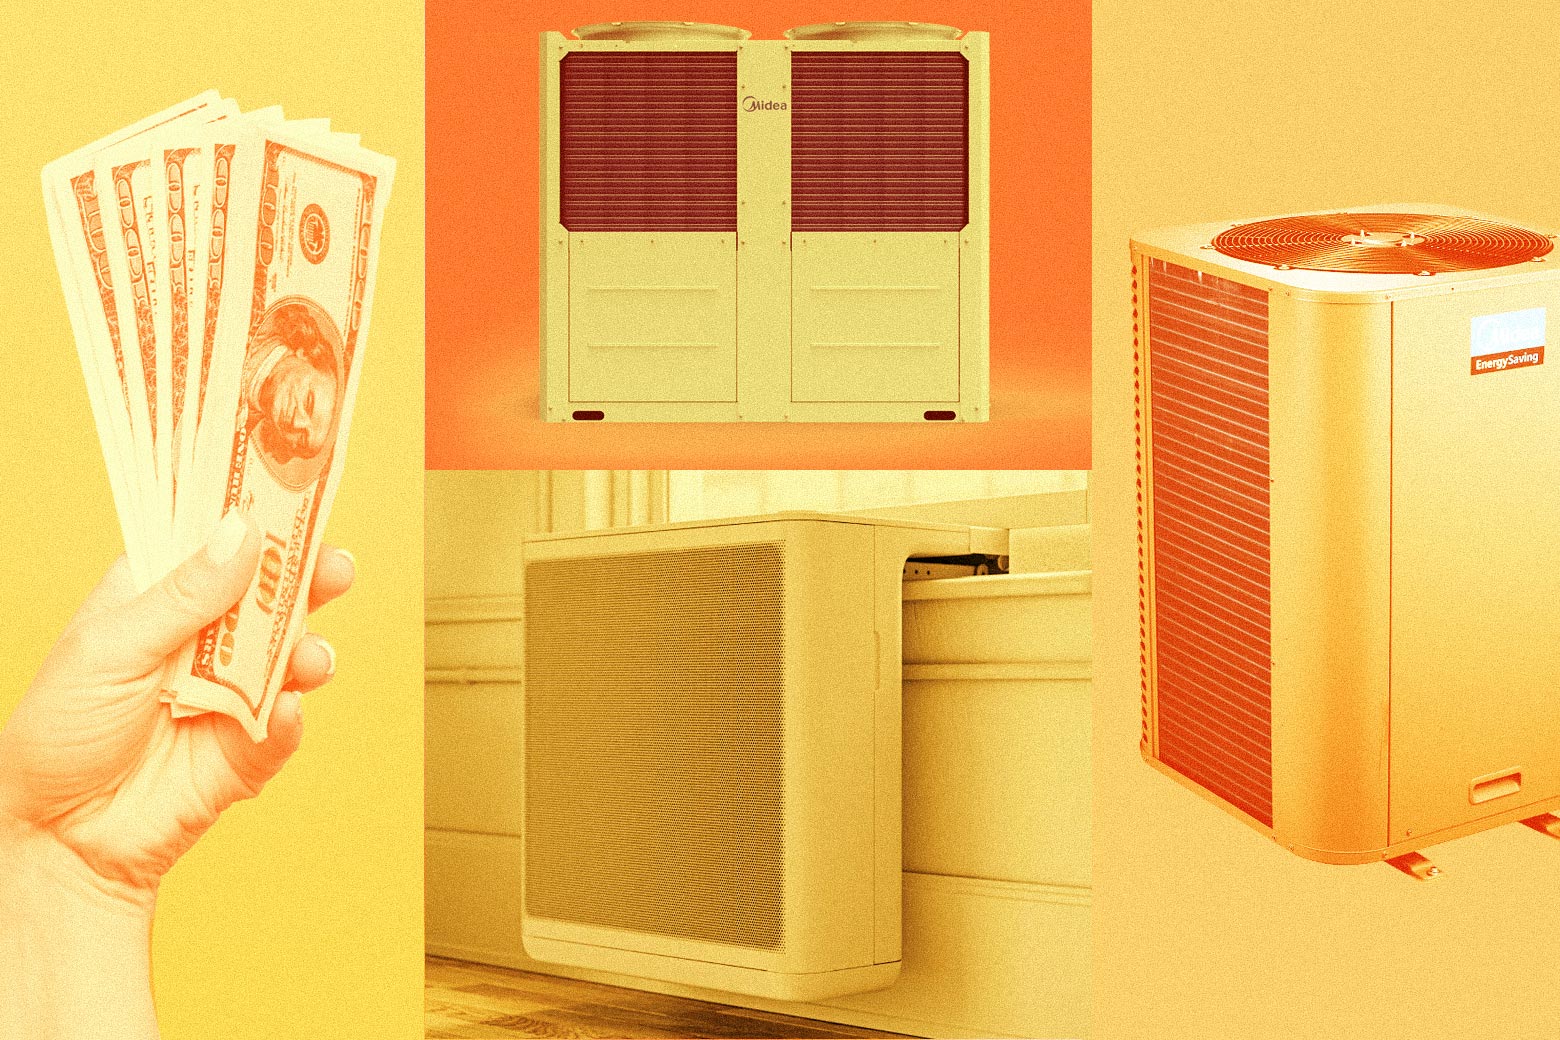 It’s Time to Re-imagine the Air Conditioner